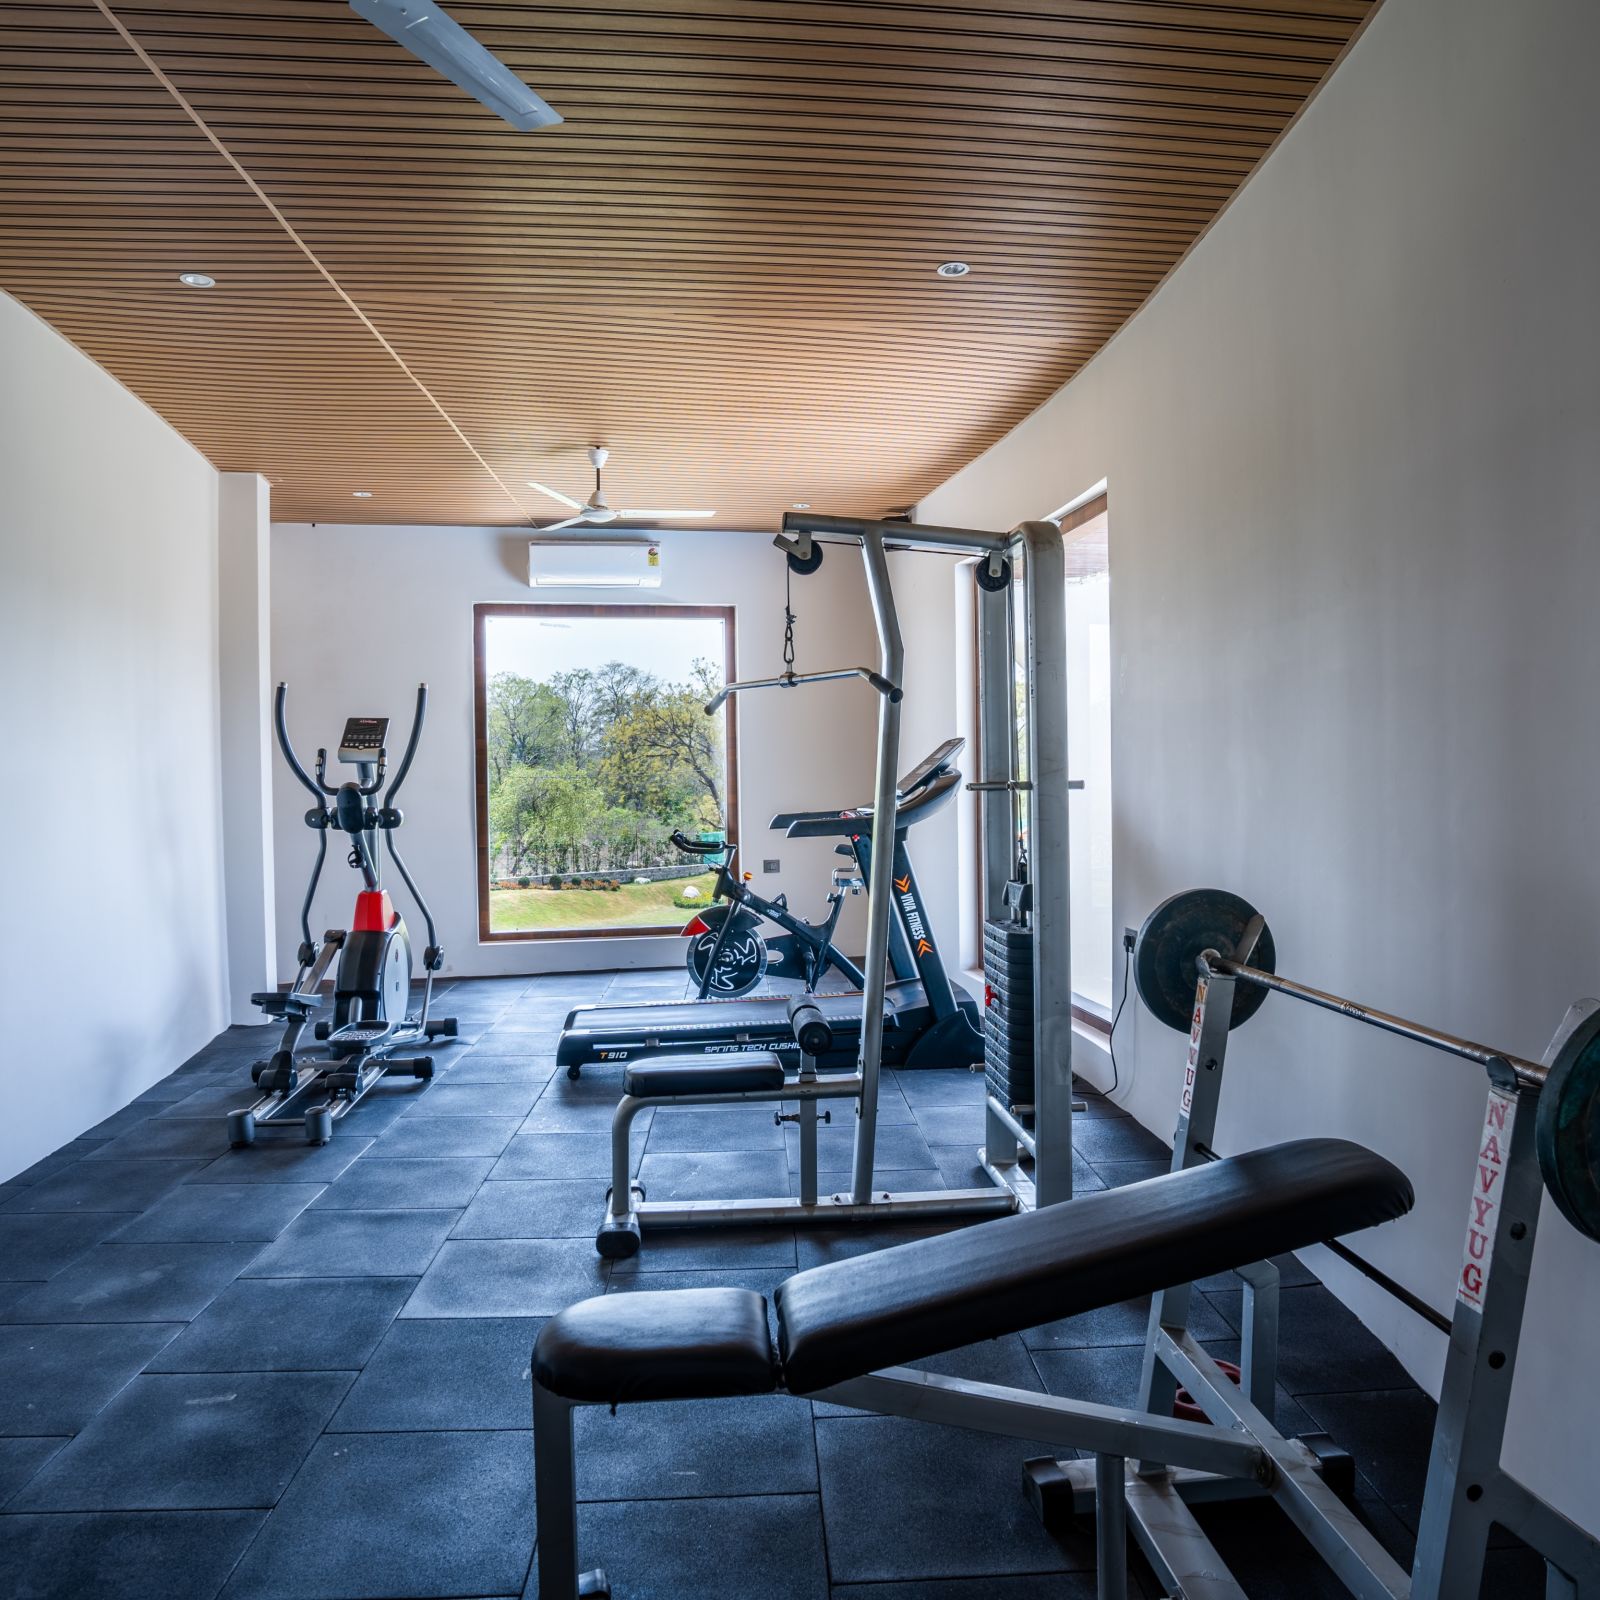 A gym room with cycling machines, a bench press, a thread mill and a lat pull down machine - Shervani Pebbles & Pines, Corbett